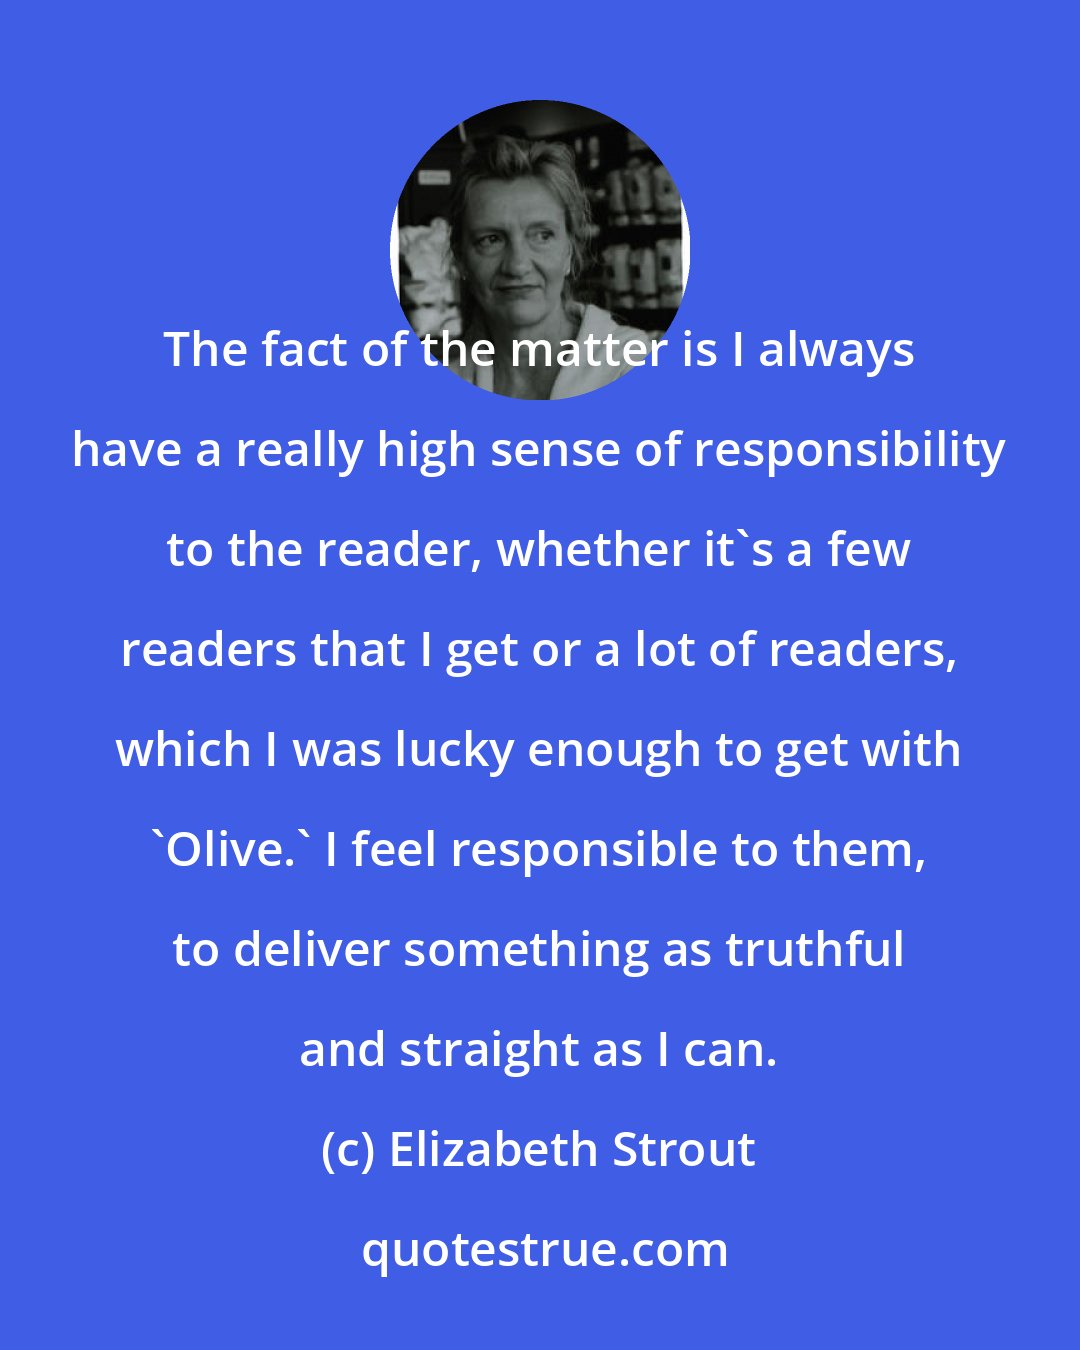 Elizabeth Strout: The fact of the matter is I always have a really high sense of responsibility to the reader, whether it's a few readers that I get or a lot of readers, which I was lucky enough to get with 'Olive.' I feel responsible to them, to deliver something as truthful and straight as I can.